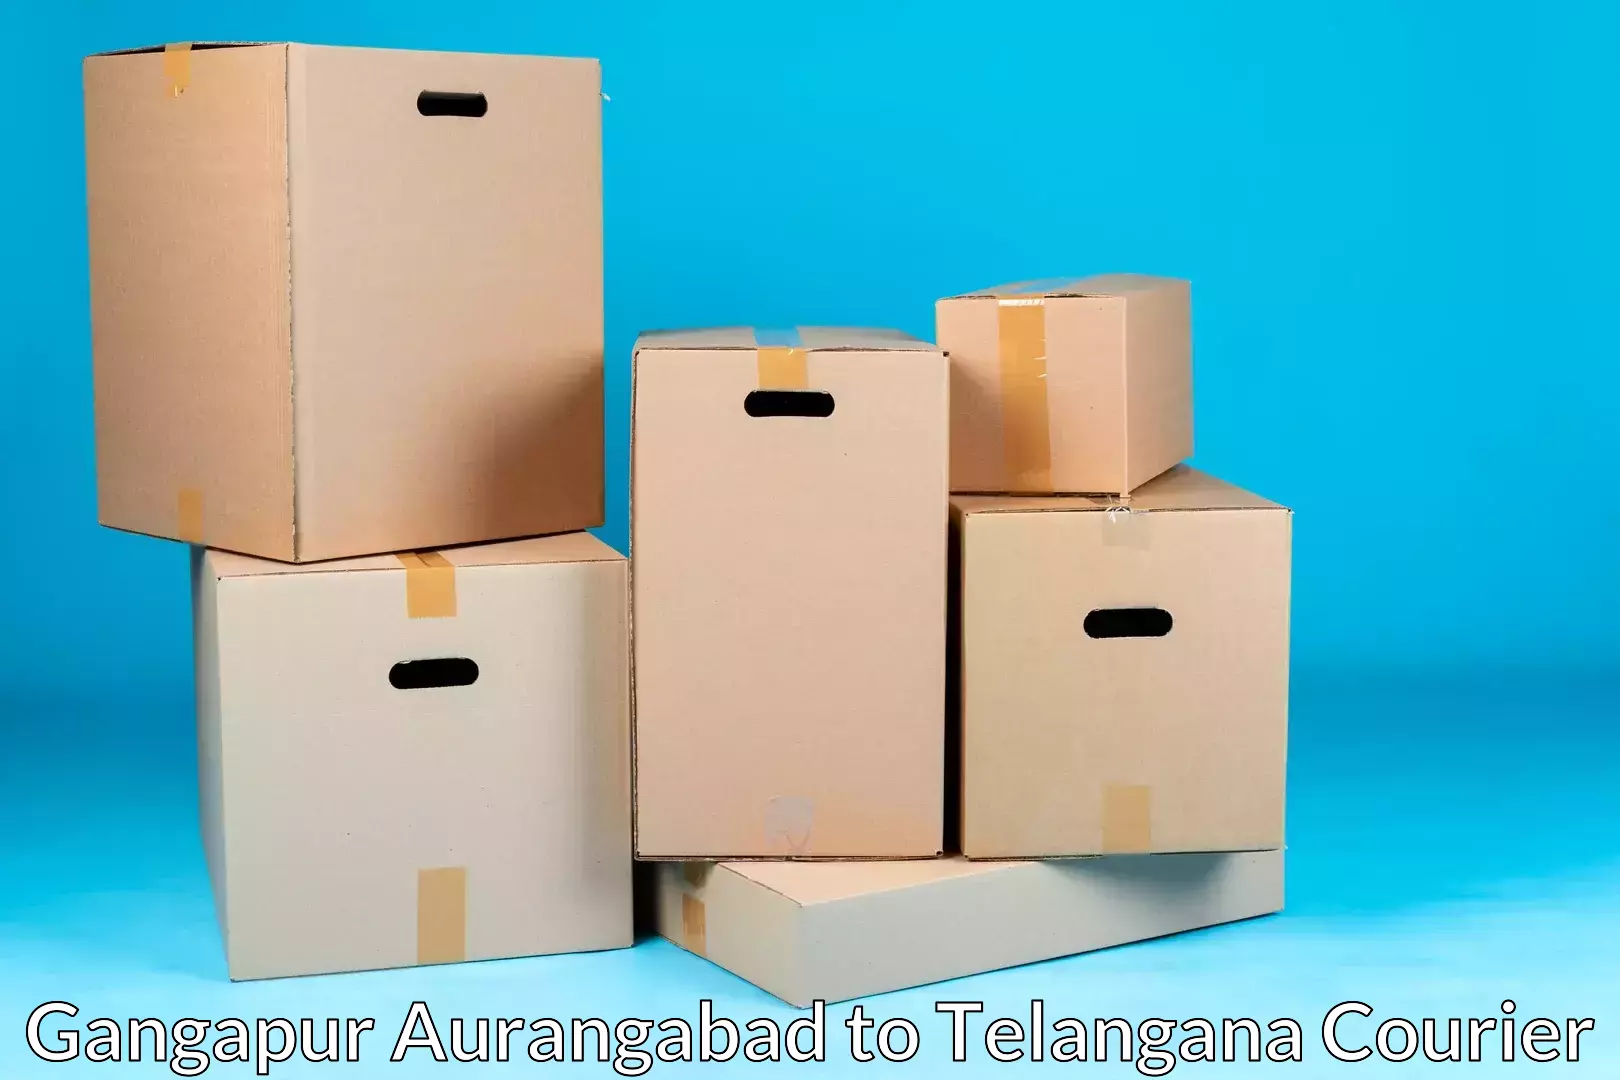 Professional packing services in Gangapur Aurangabad to Jogipet